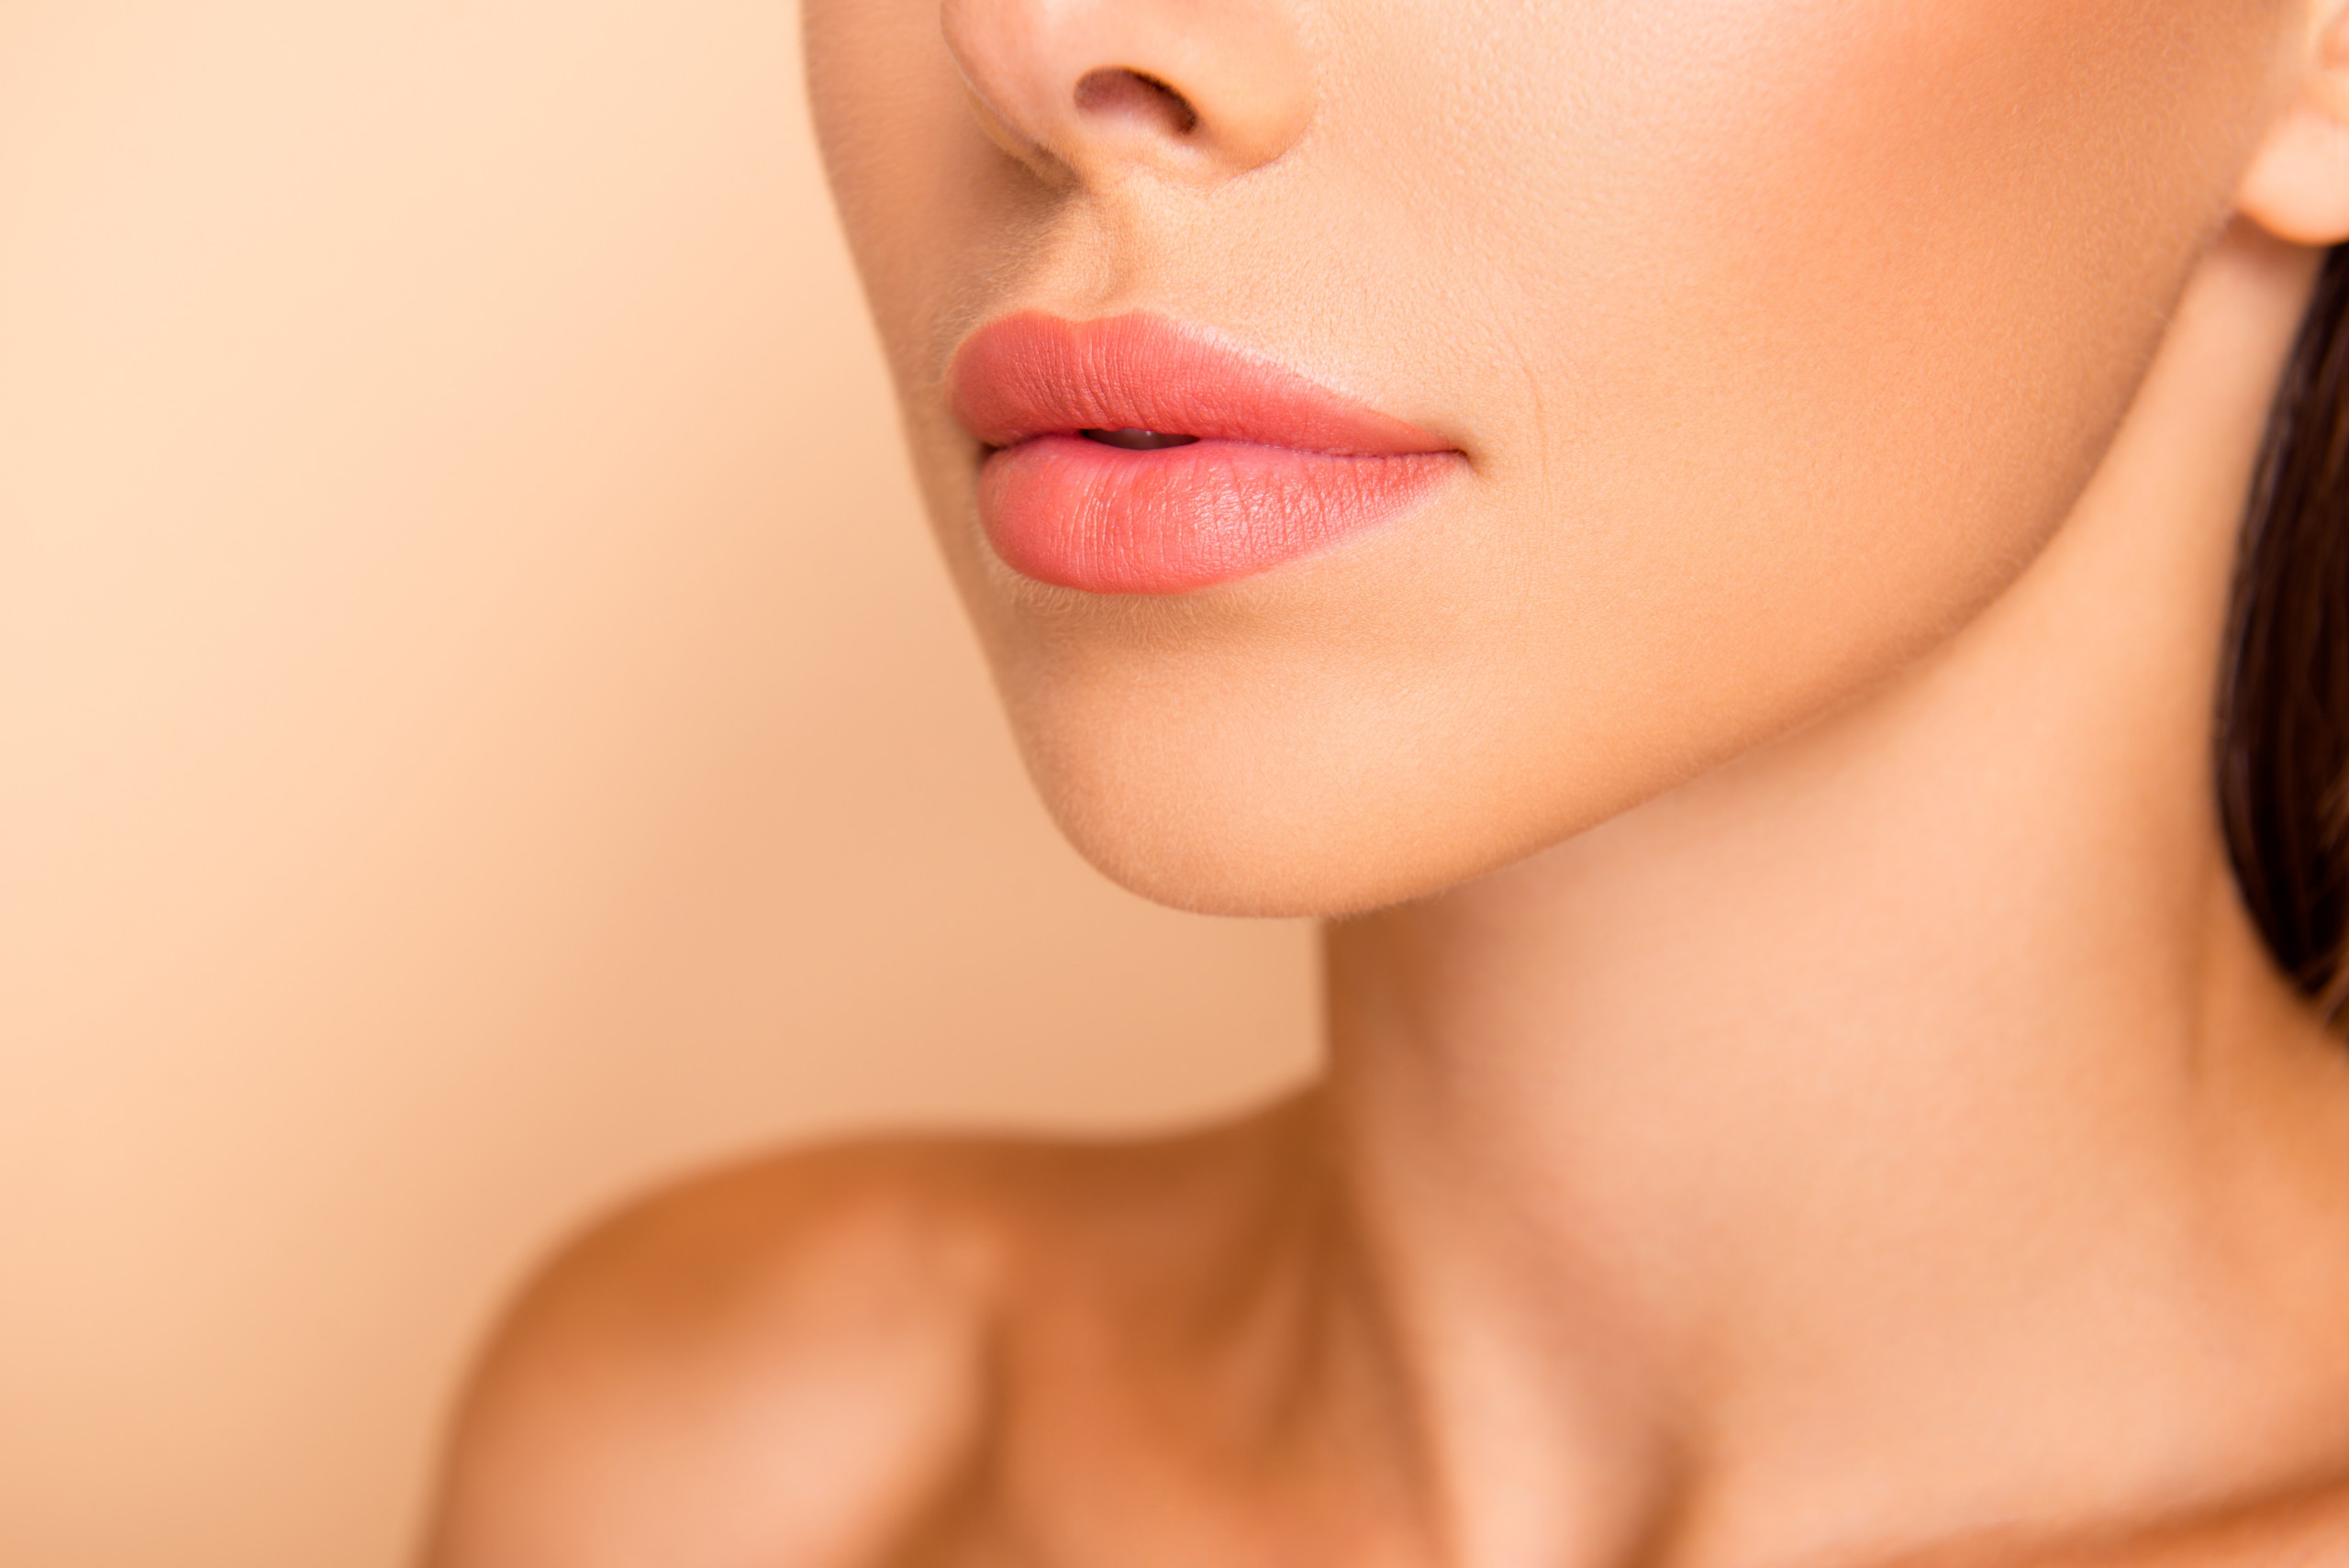 Lip Augmentation and Enhancement: Anatomy of a Perfect Pout